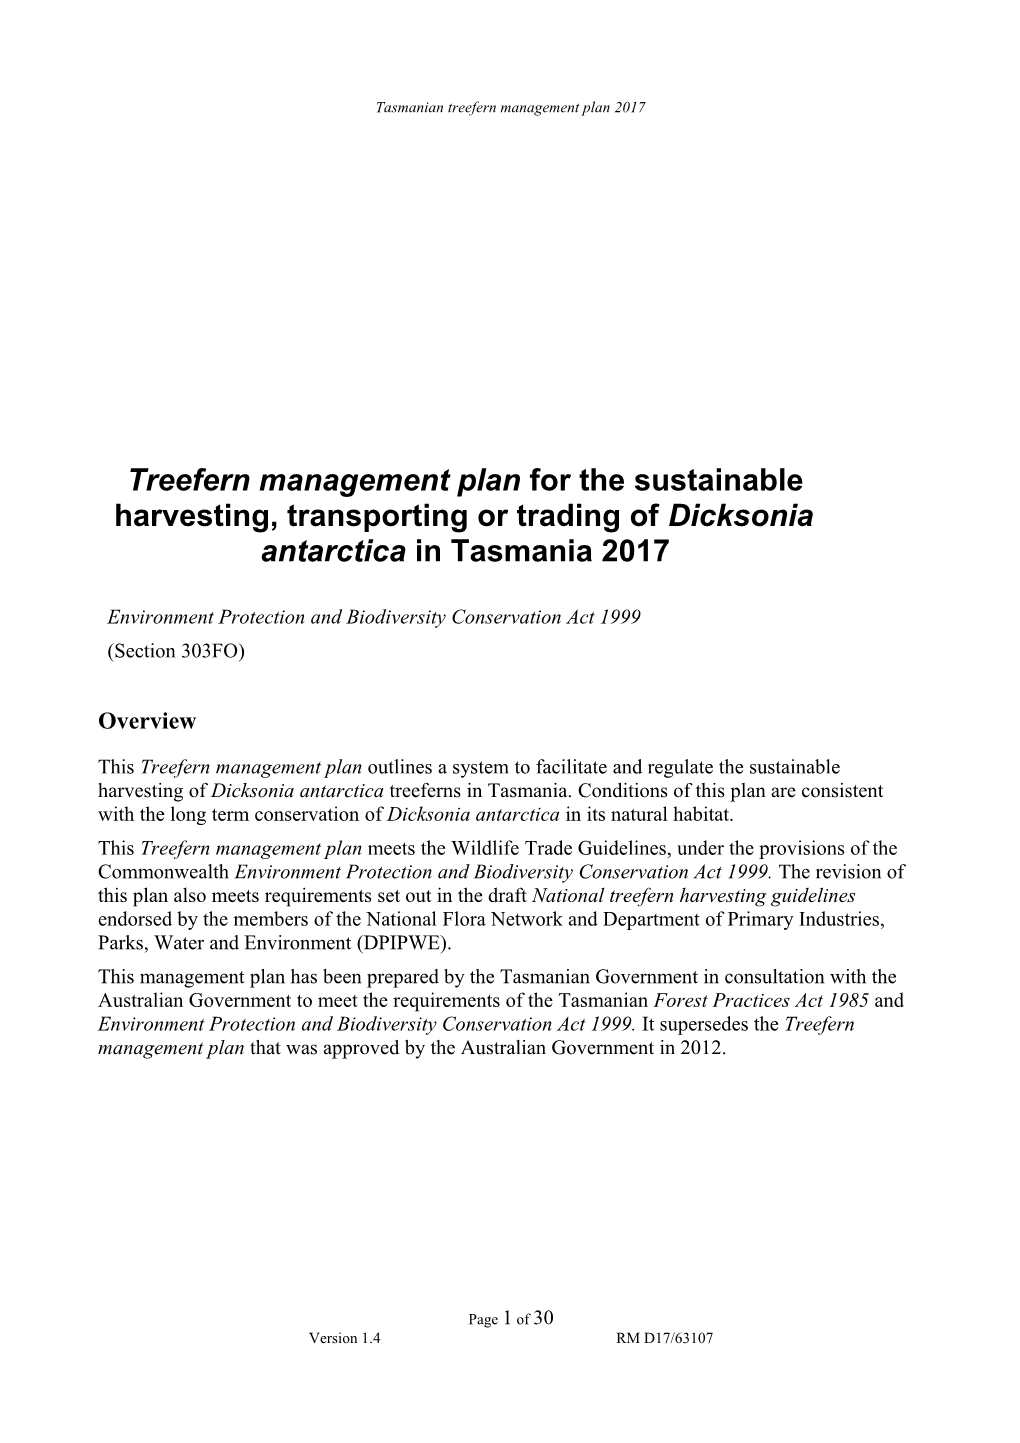 Treefern Management Plan for the Sustainable Harvesting, Transporting Or Trading of Dicksonia